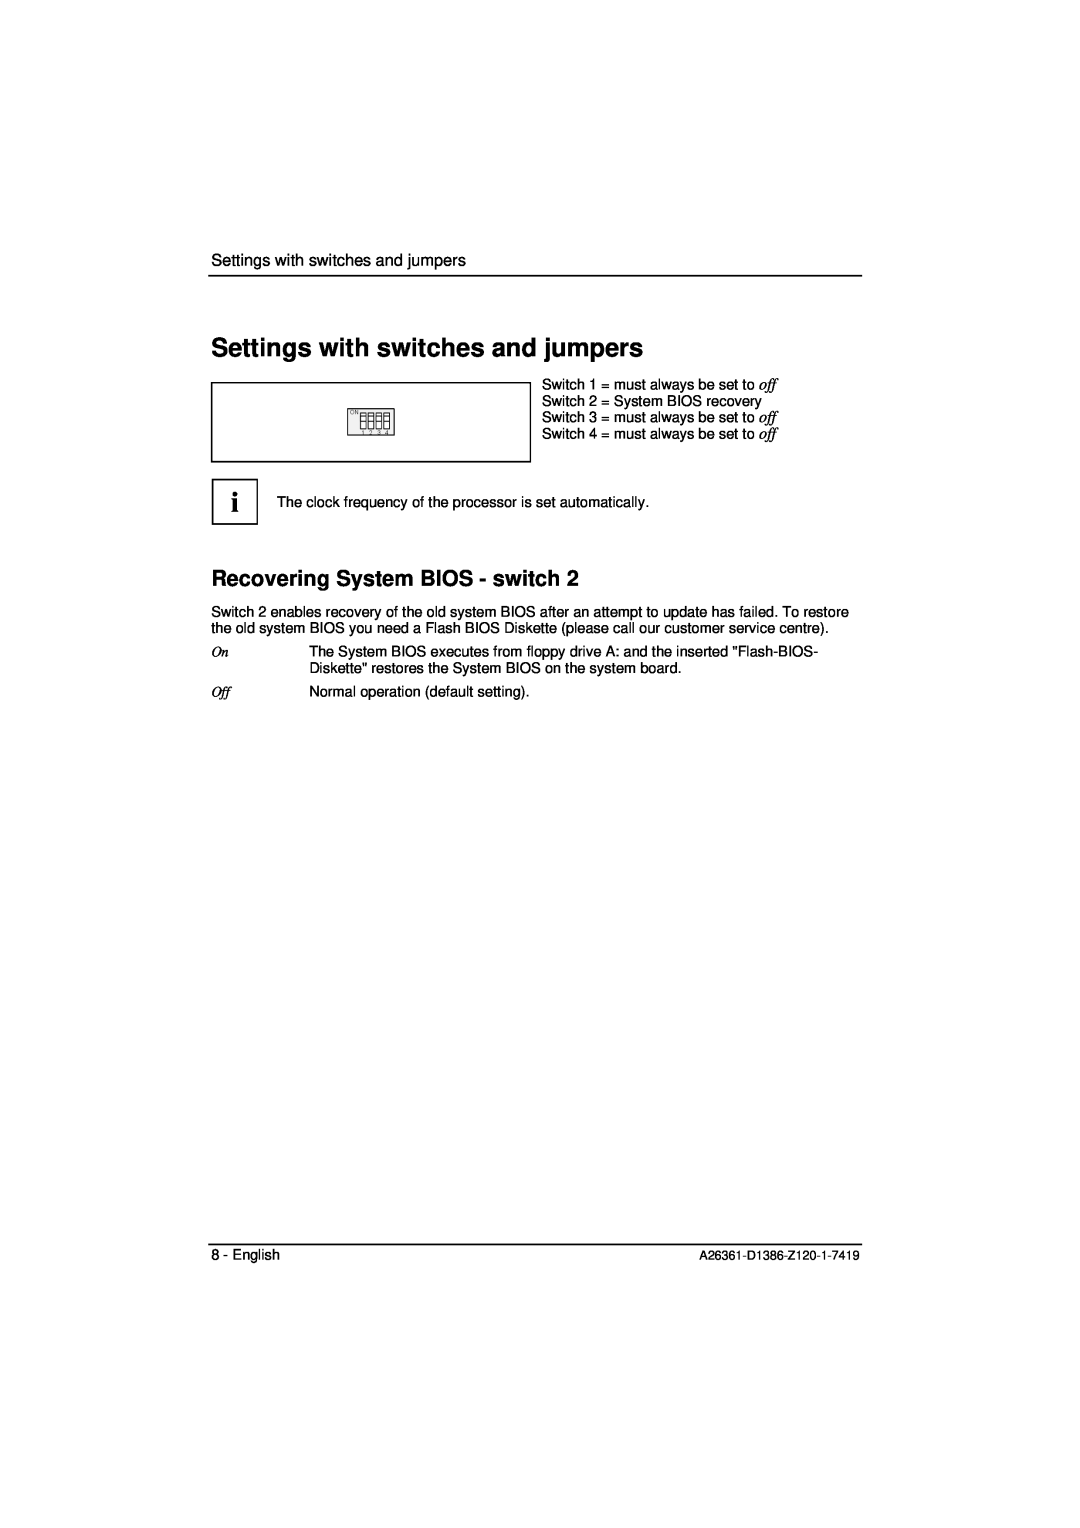 Fujitsu D1386 technical manual Settings with switches and jumpers, Recovering System BIOS - switch 